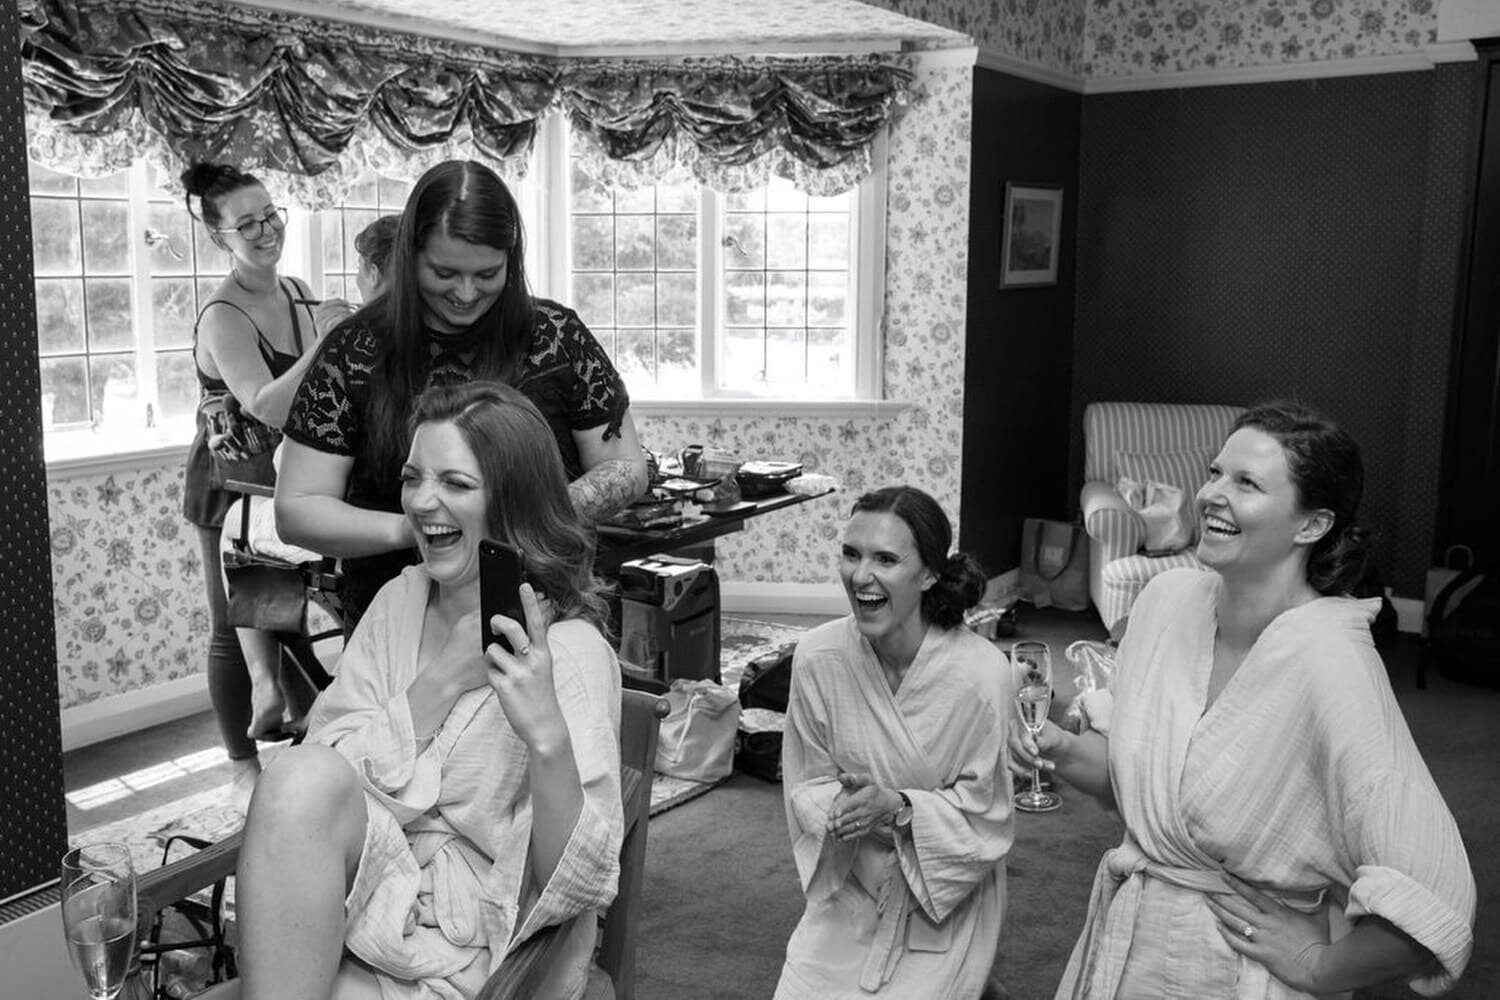 02_wairarapa-wedding-longwood-jessDewsnap01_bride and bridesmaids laugh as they get ready on the big day. .jpg